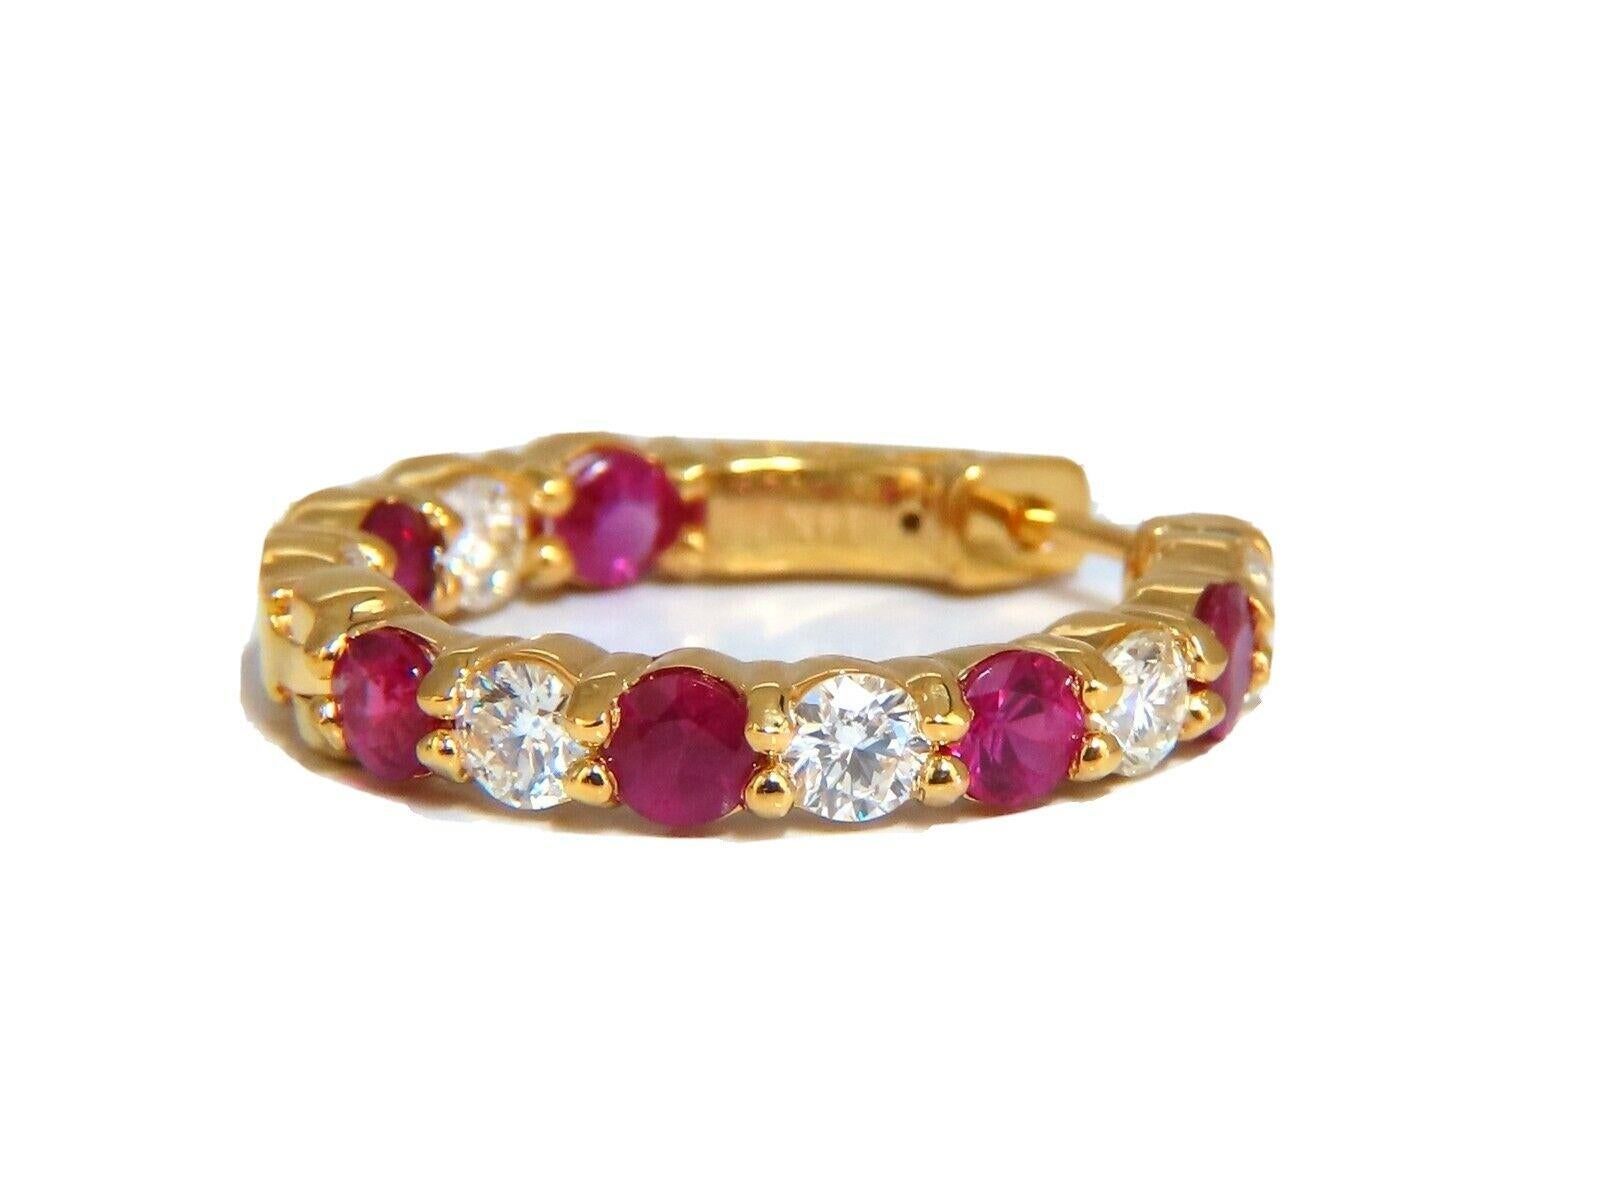 Round Cut 4.14ct Natural Ruby Diamonds Hoop Earrings 14kt Yellow Gold Inside Out For Sale